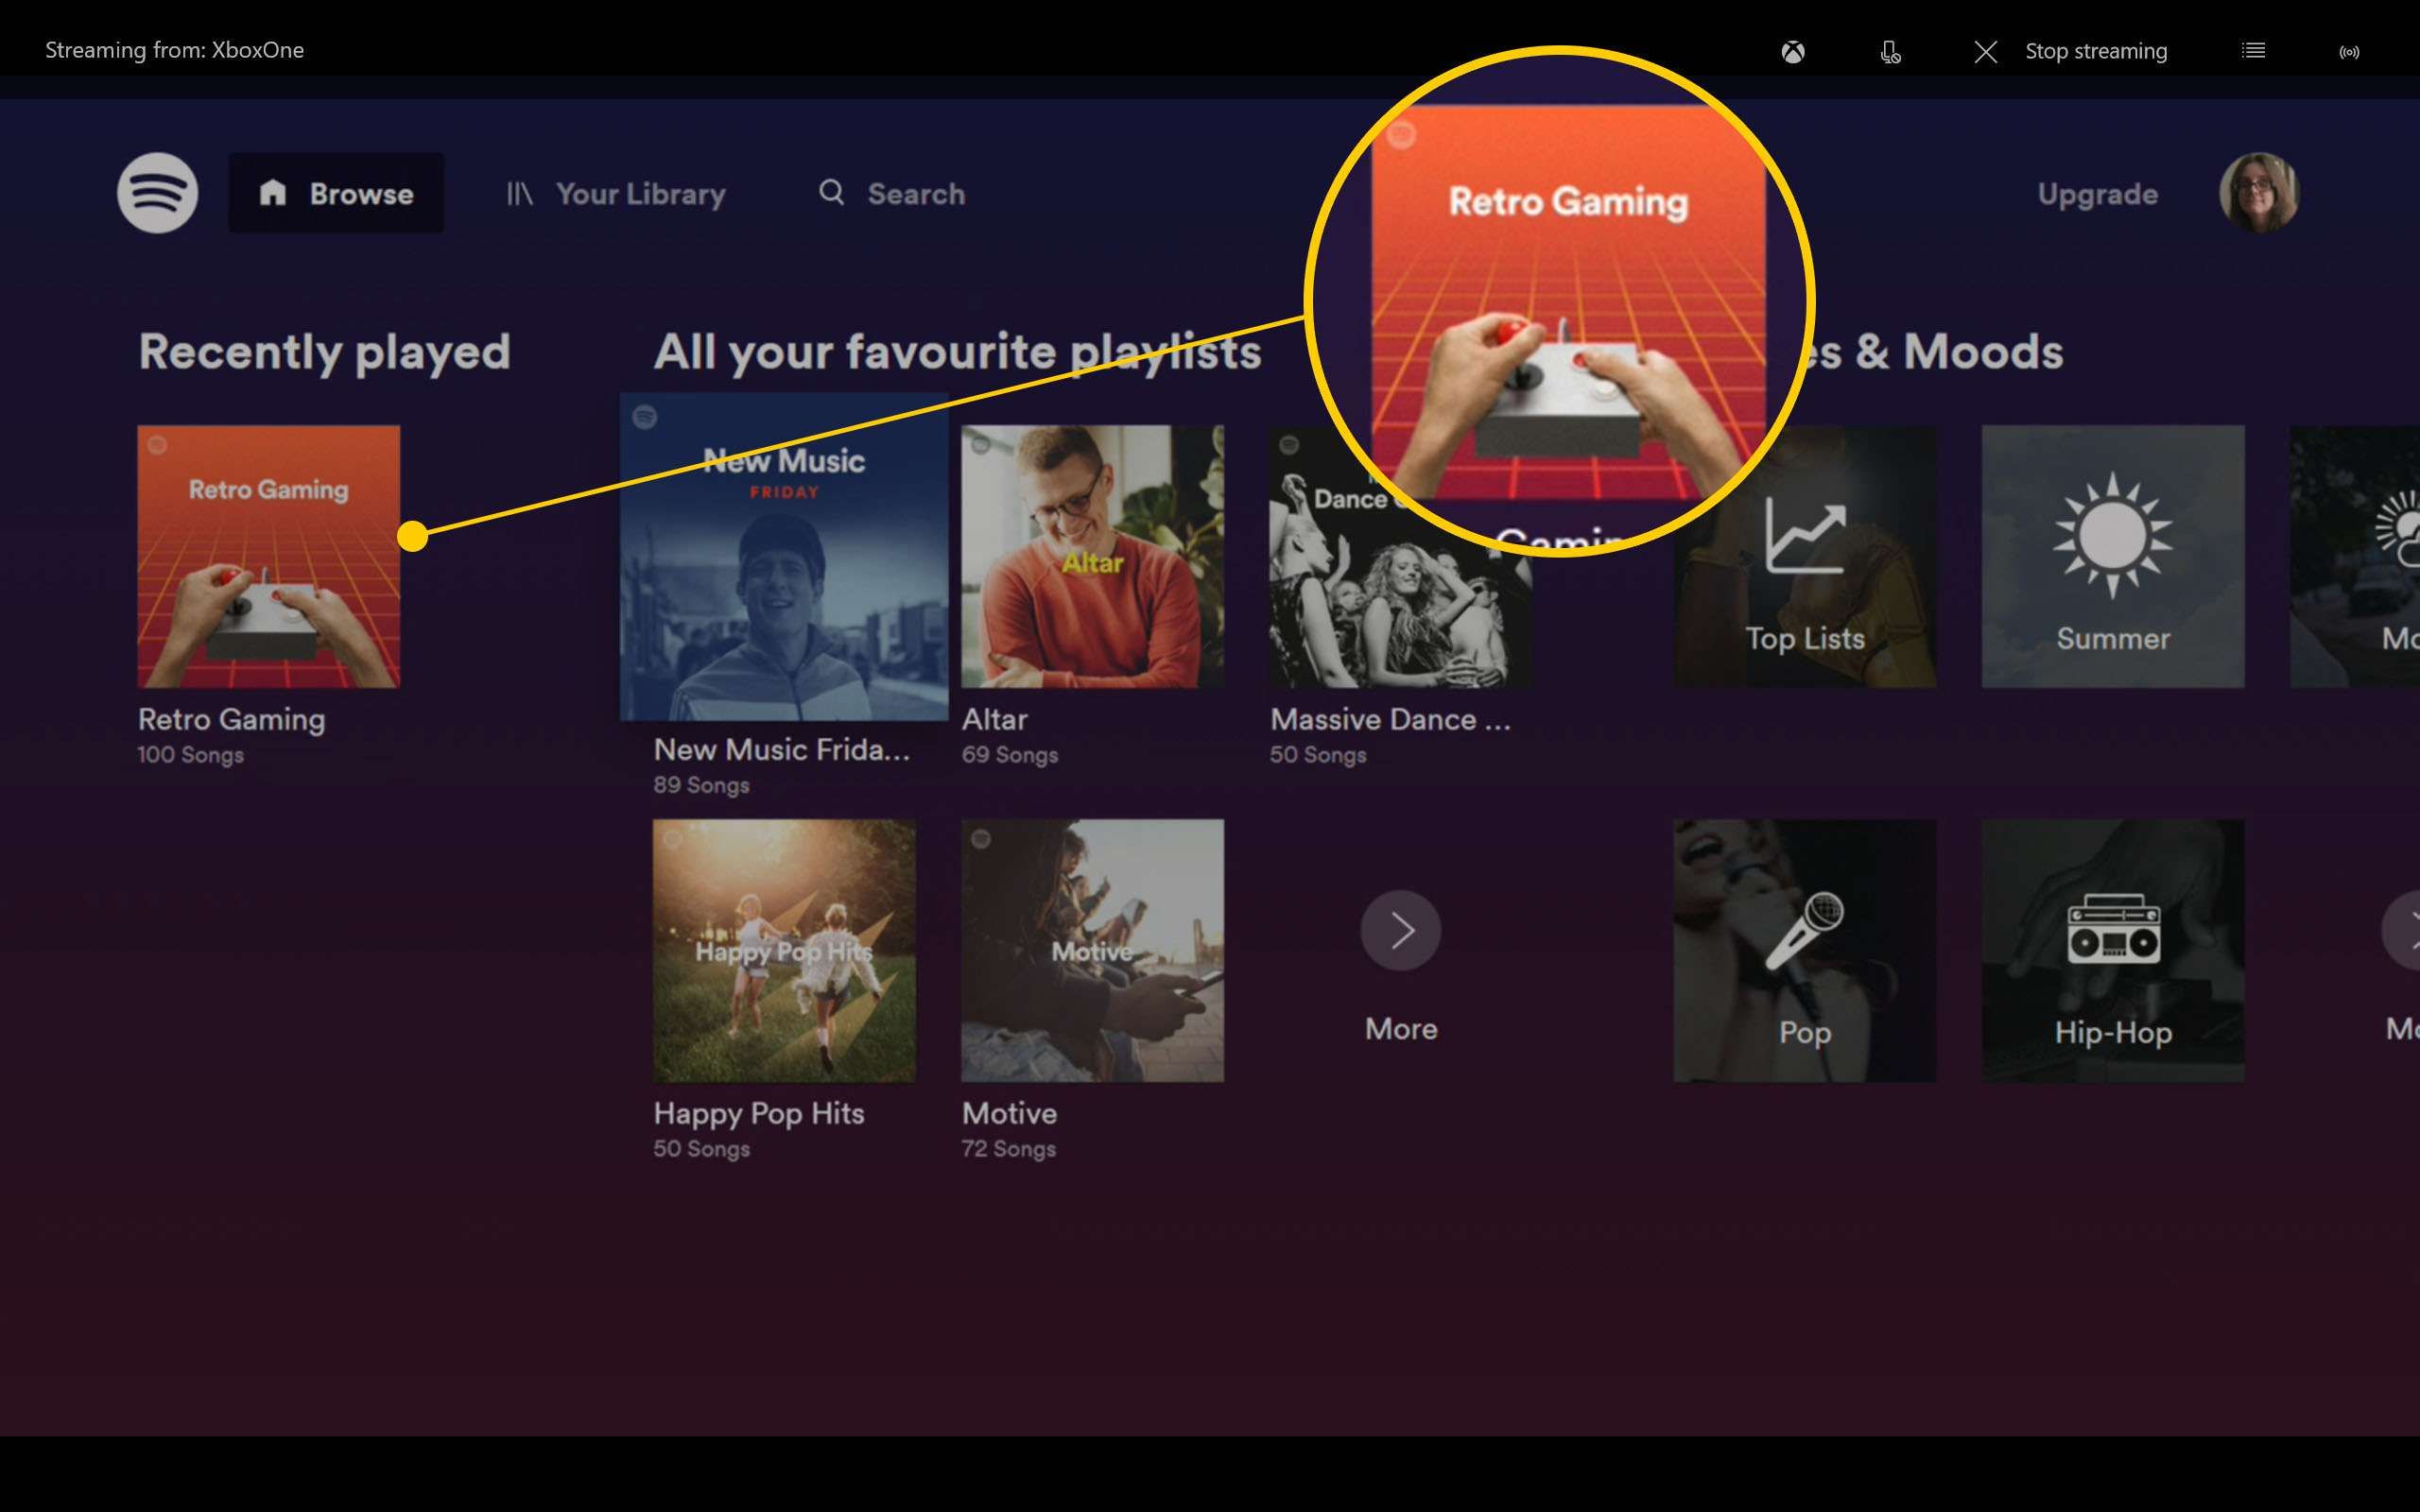 Xbox One's Spotify app with playlists highlighted